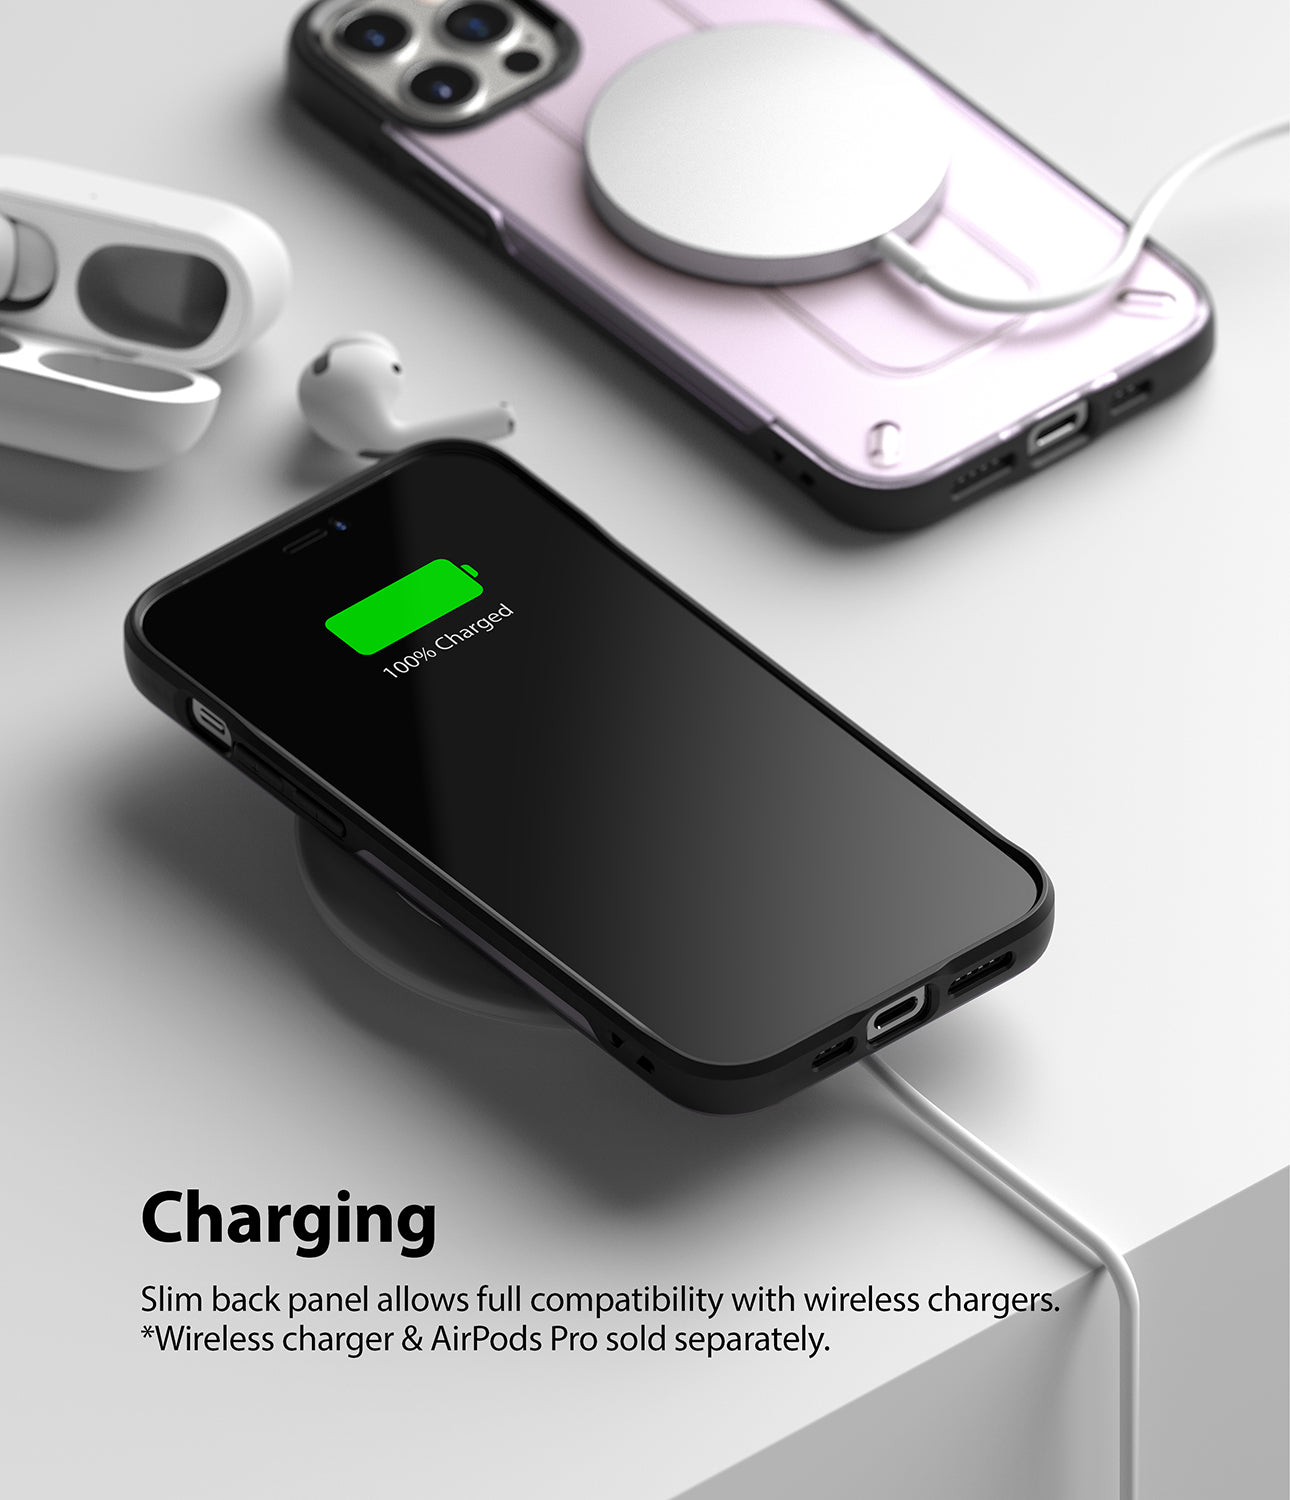 slim back panel allows wireless charging feature without removing the case